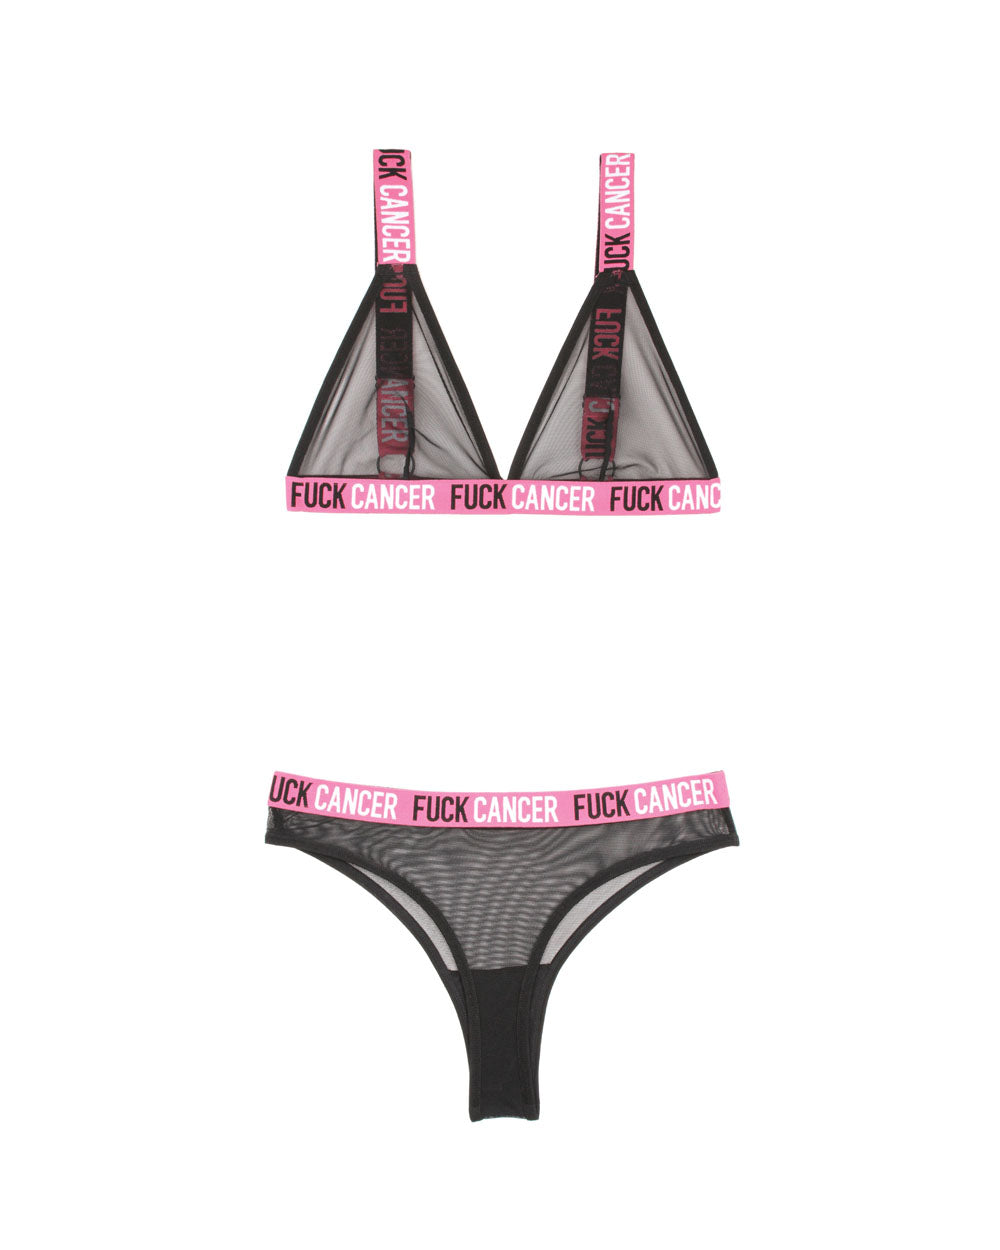 Fuck Cancer Bralette and Cheeky Panty Set - Black - S/m